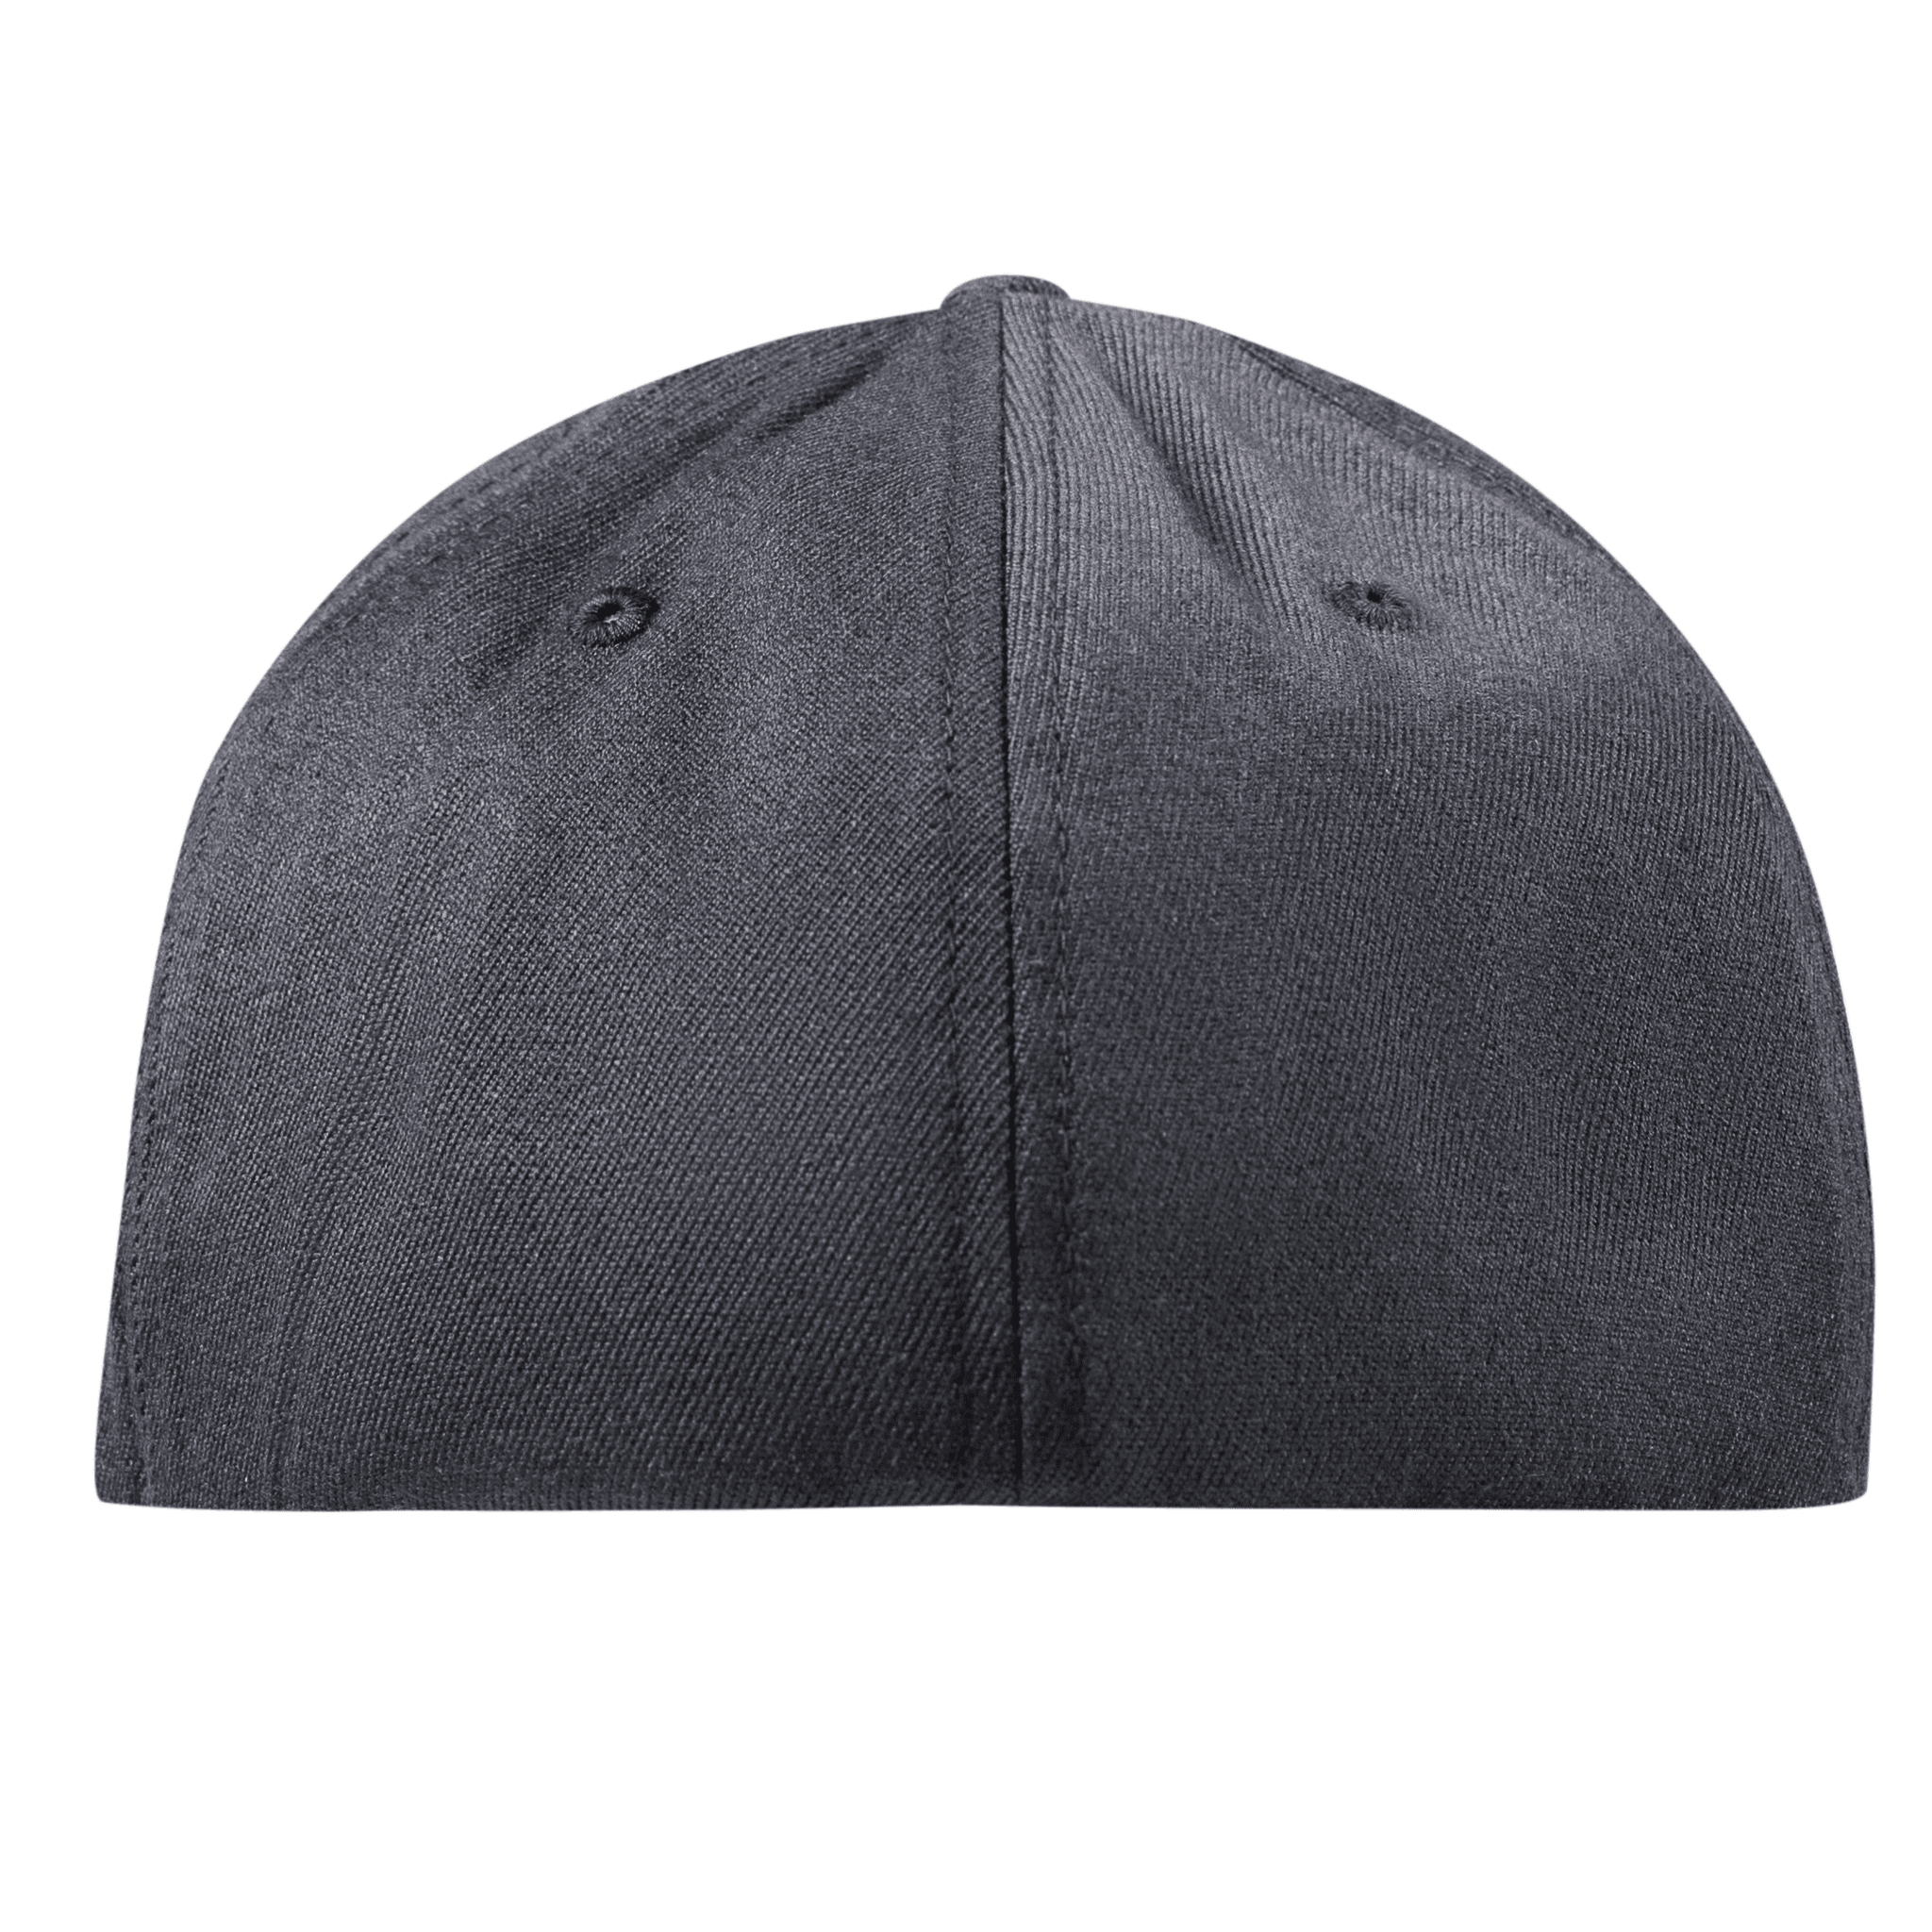 South Carolina 8 Midnight Flexfit Fitted Back Charcoal